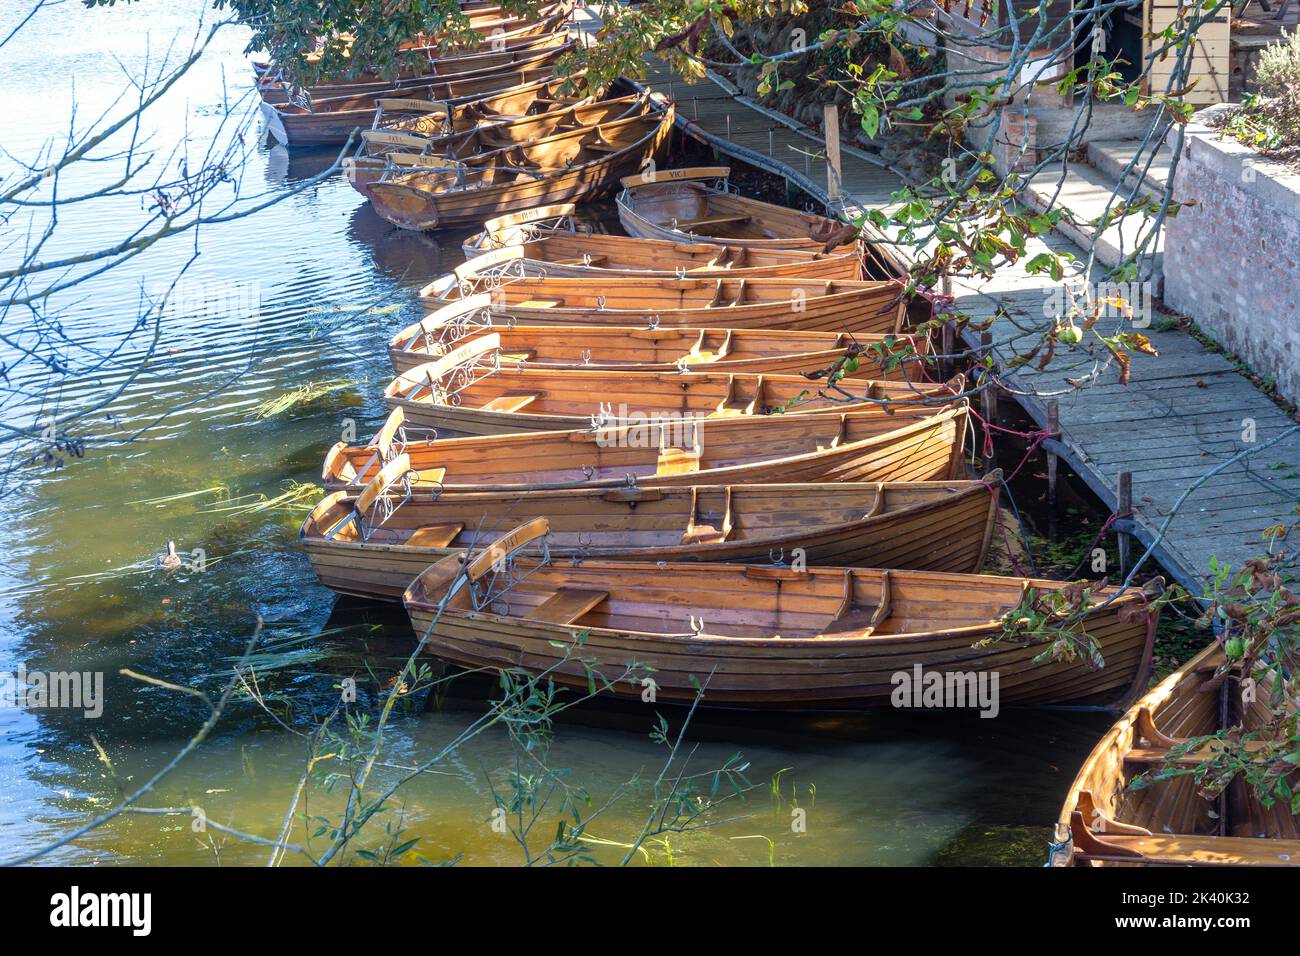 Wooden hire-boats on River Stour, The Boathouse, Mill Lane Dedham, Essex, England, United Kingdom Stock Photo